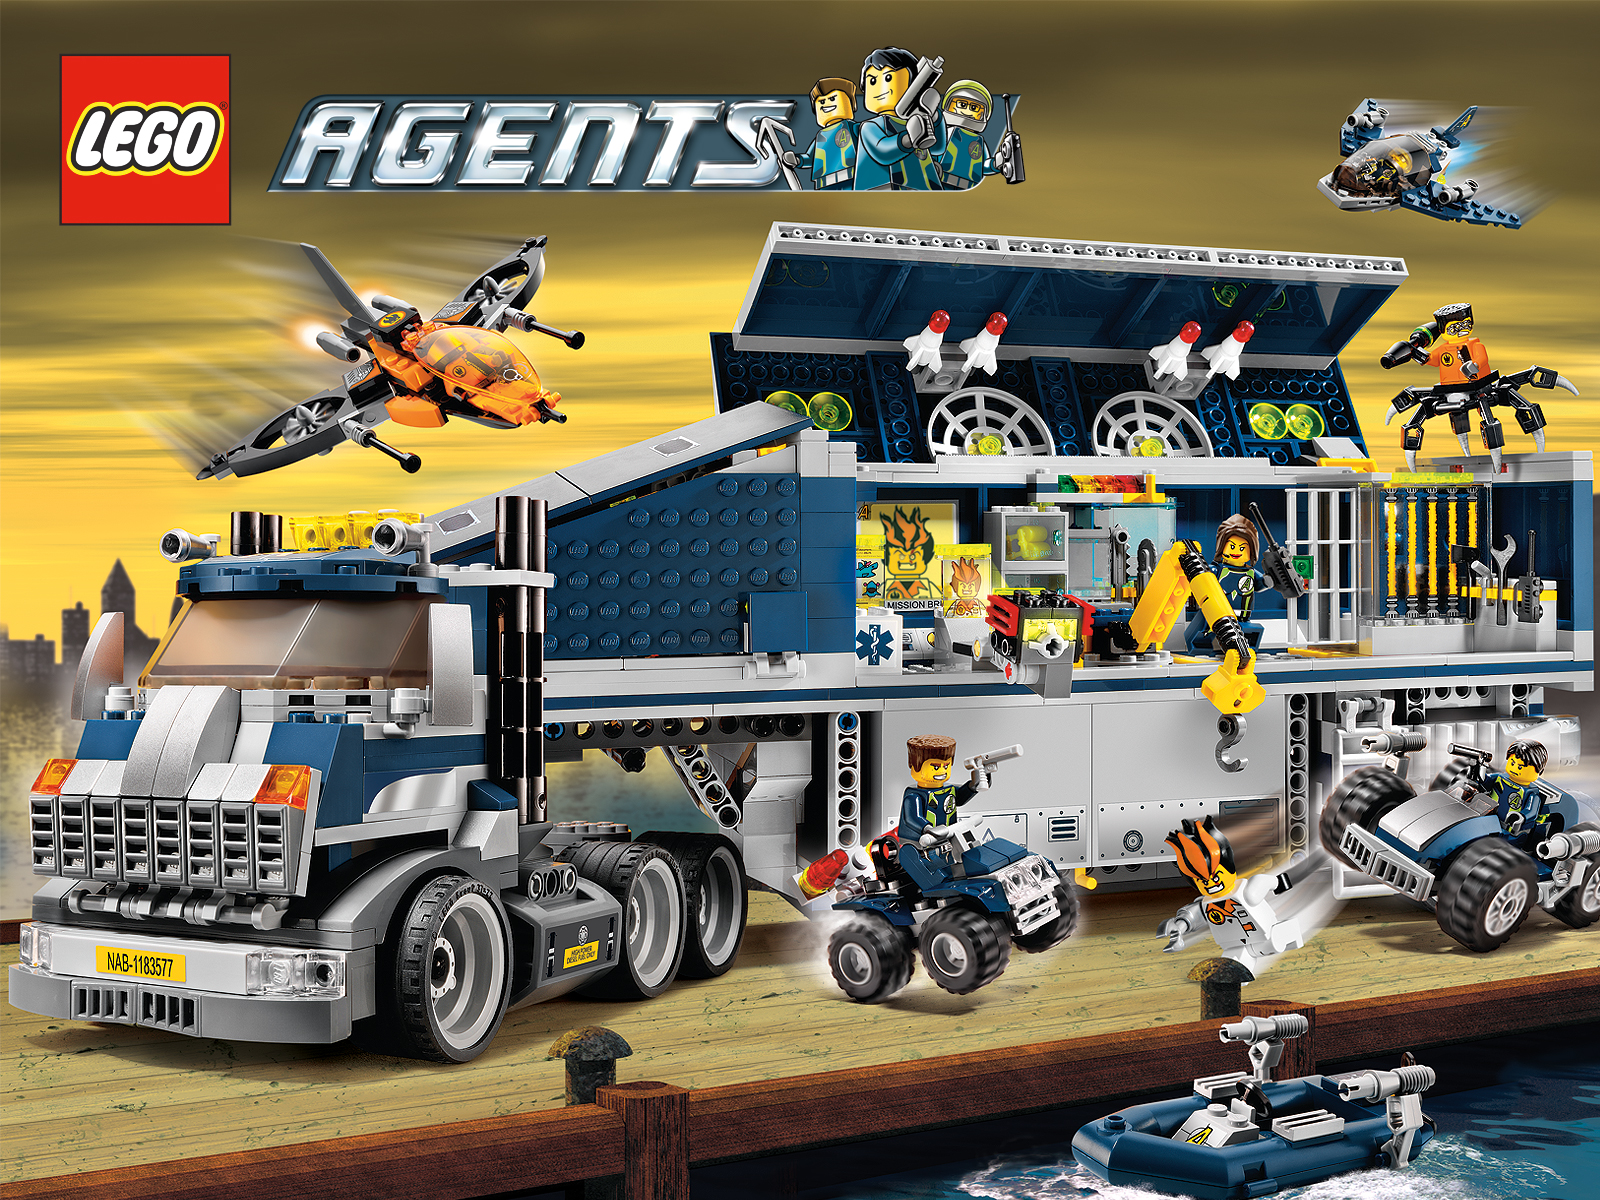 Lego Agents Desktop Wallpapers for HD Widescreen and Mobile 1600x1200